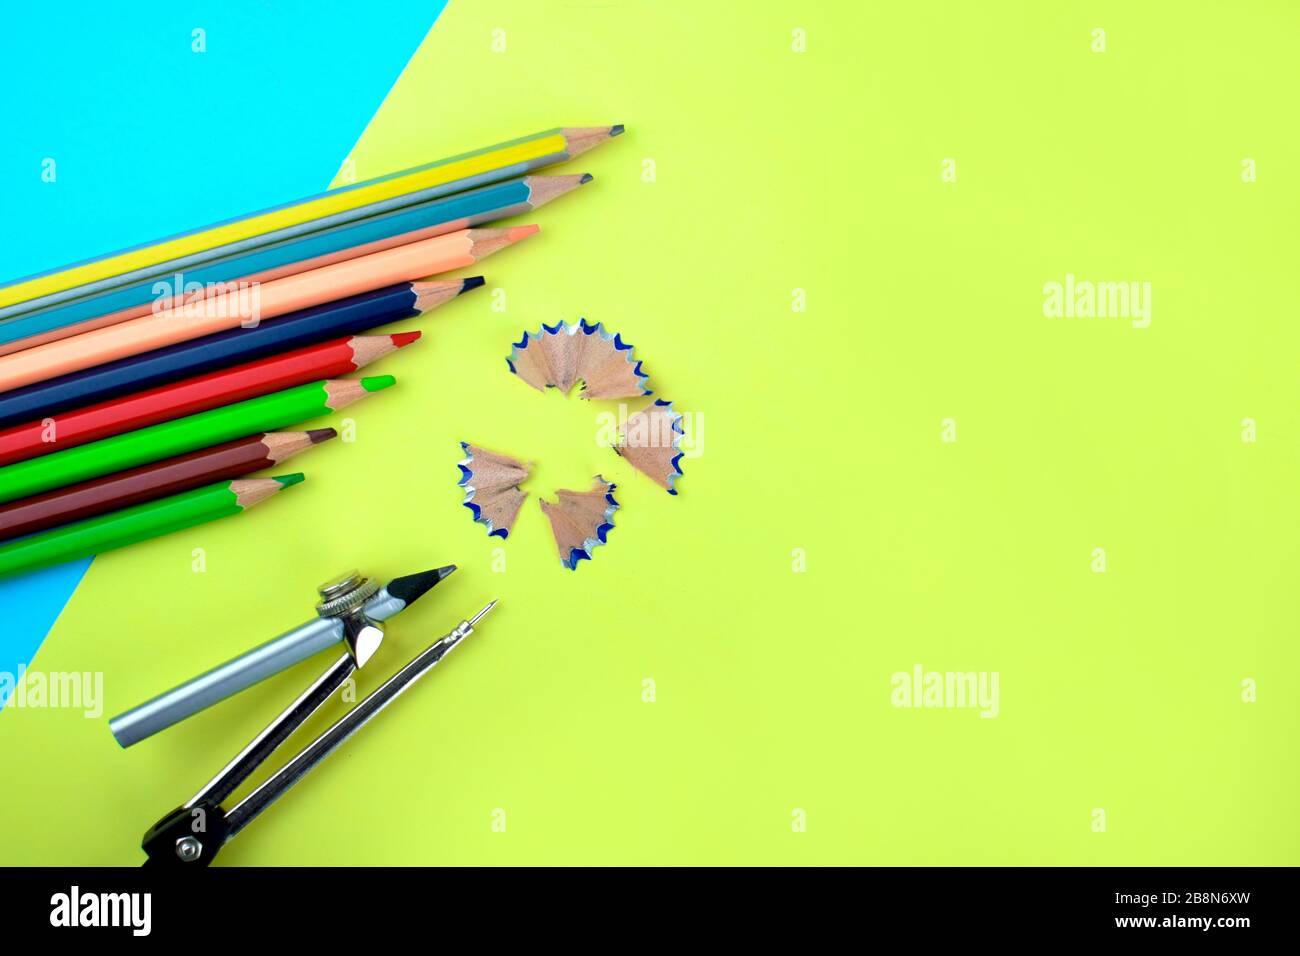 Eight different colored wood pencils and a pencil attached to a pencil compass pointing at a pencil shaving over a paper background Stock Photo